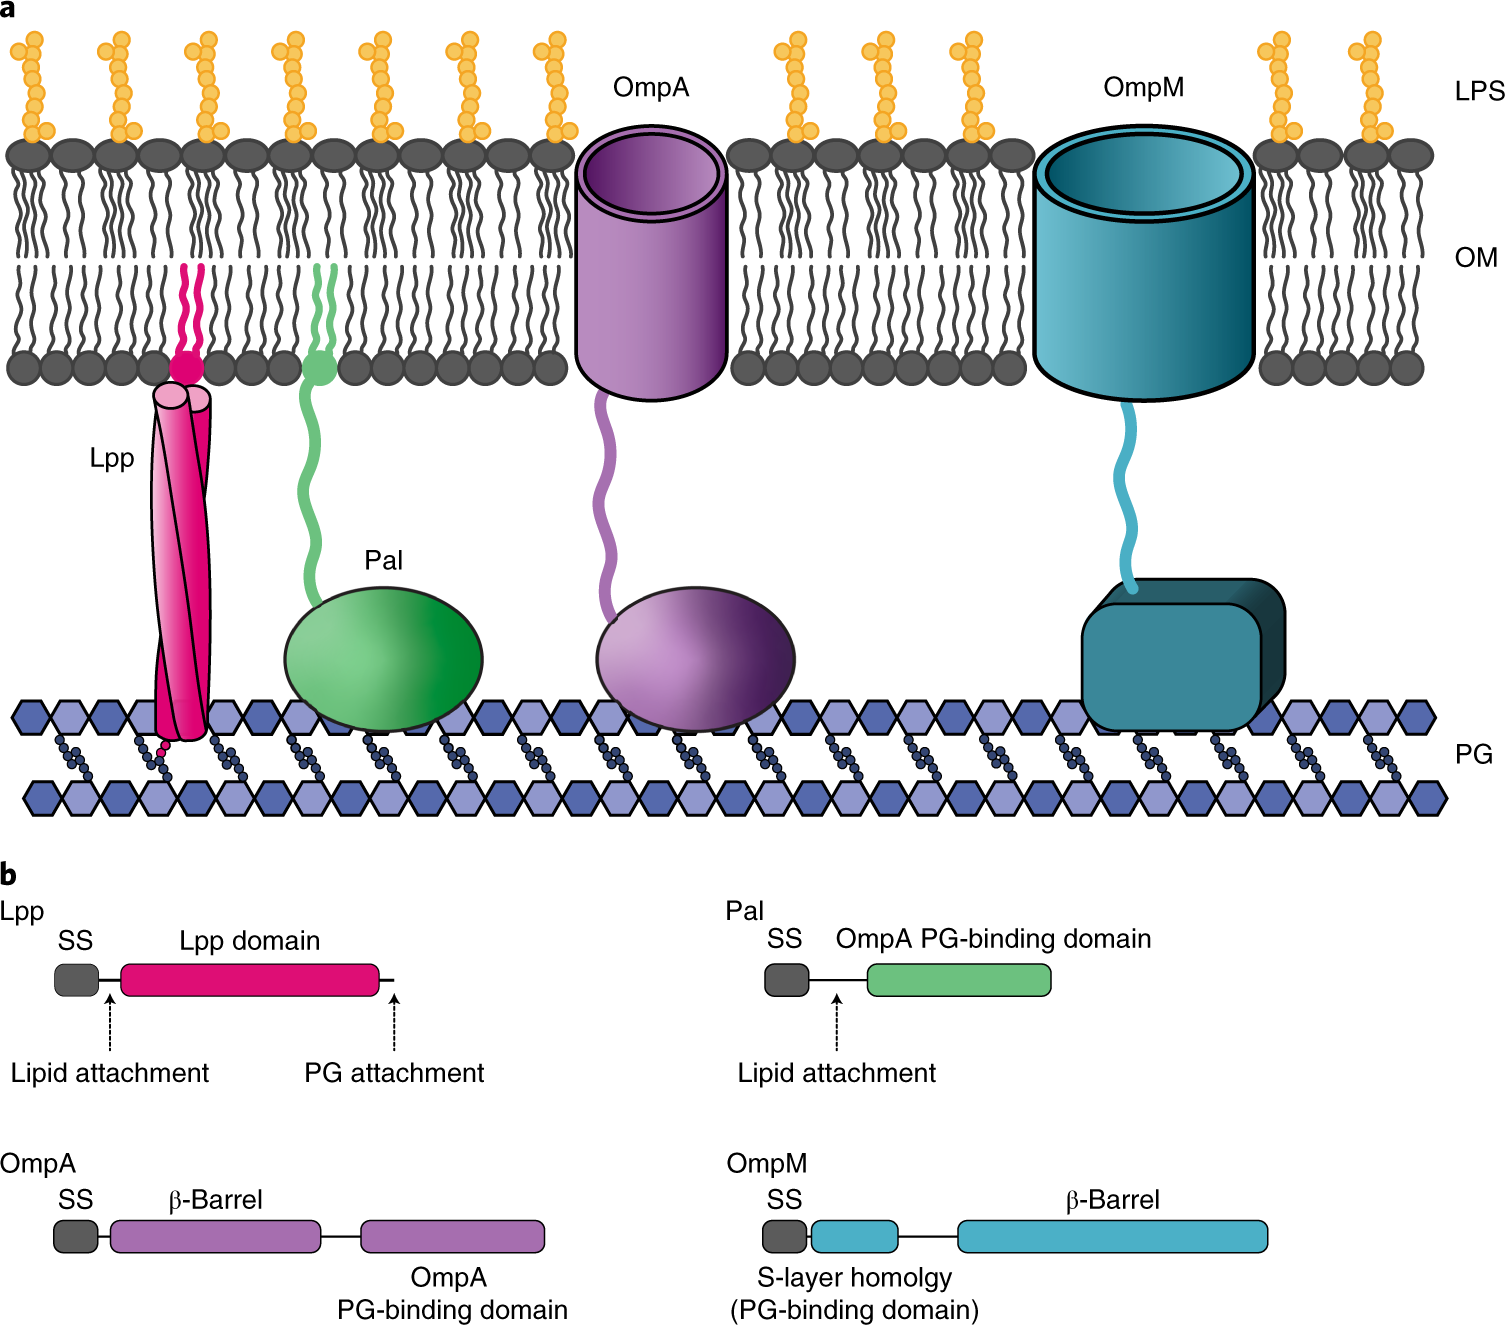 An ancient divide in outer membrane tethering systems in bacteria suggests  a mechanism for the diderm-to-monoderm transition | Nature Microbiology